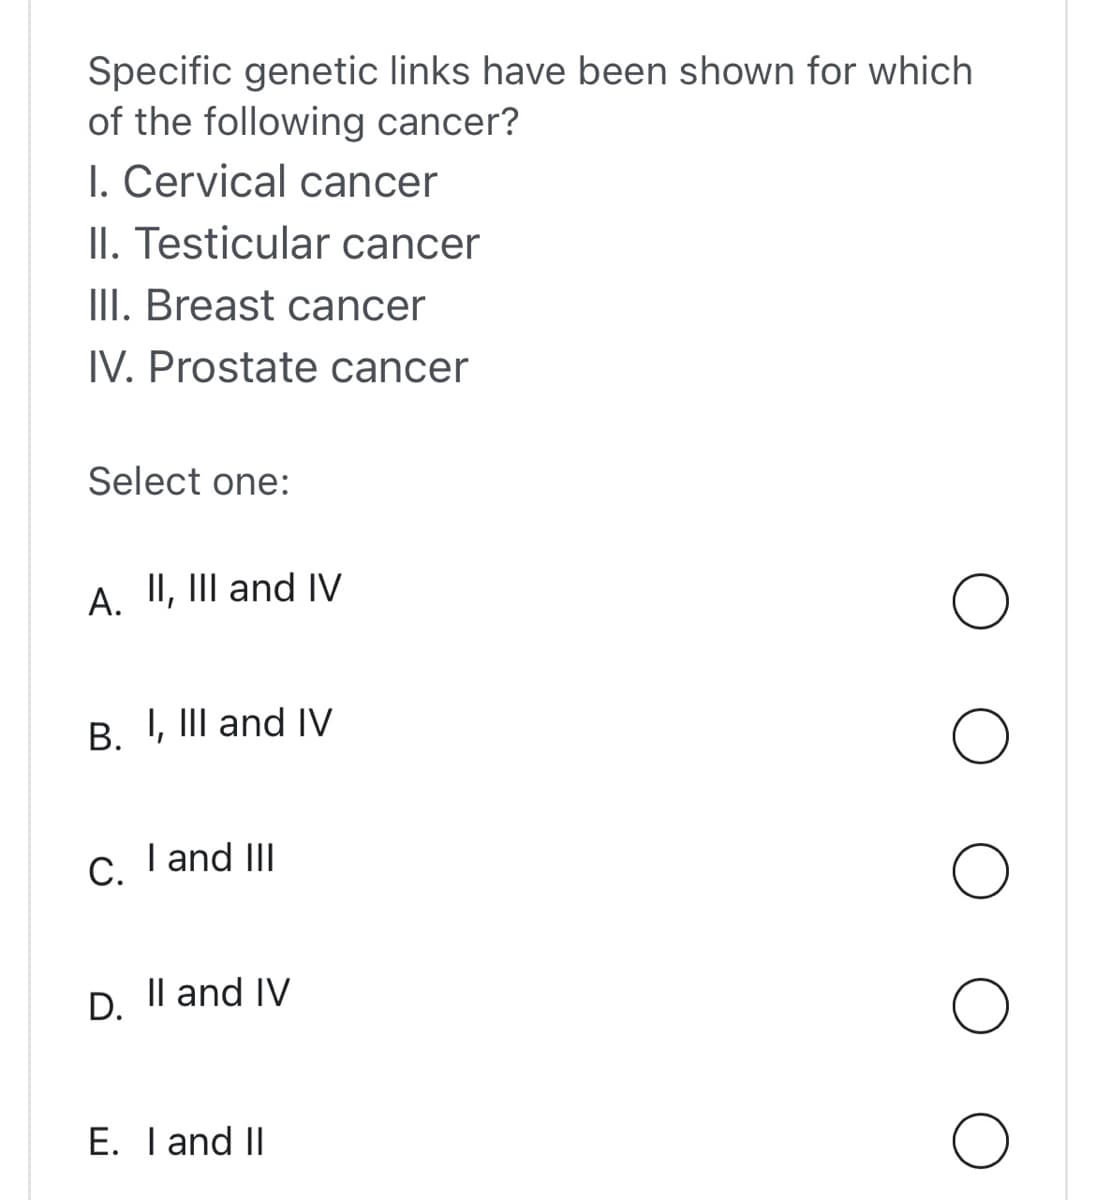 Specific genetic links have been shown for which
of the following cancer?
I. Cervical cancer
II. Testicular cancer
III. Breast cancer
IV. Prostate cancer
Select one:
A. II, III and IV
B. I, III and IV
C.
D.
I and III
II and IV
E. I and II
O
O